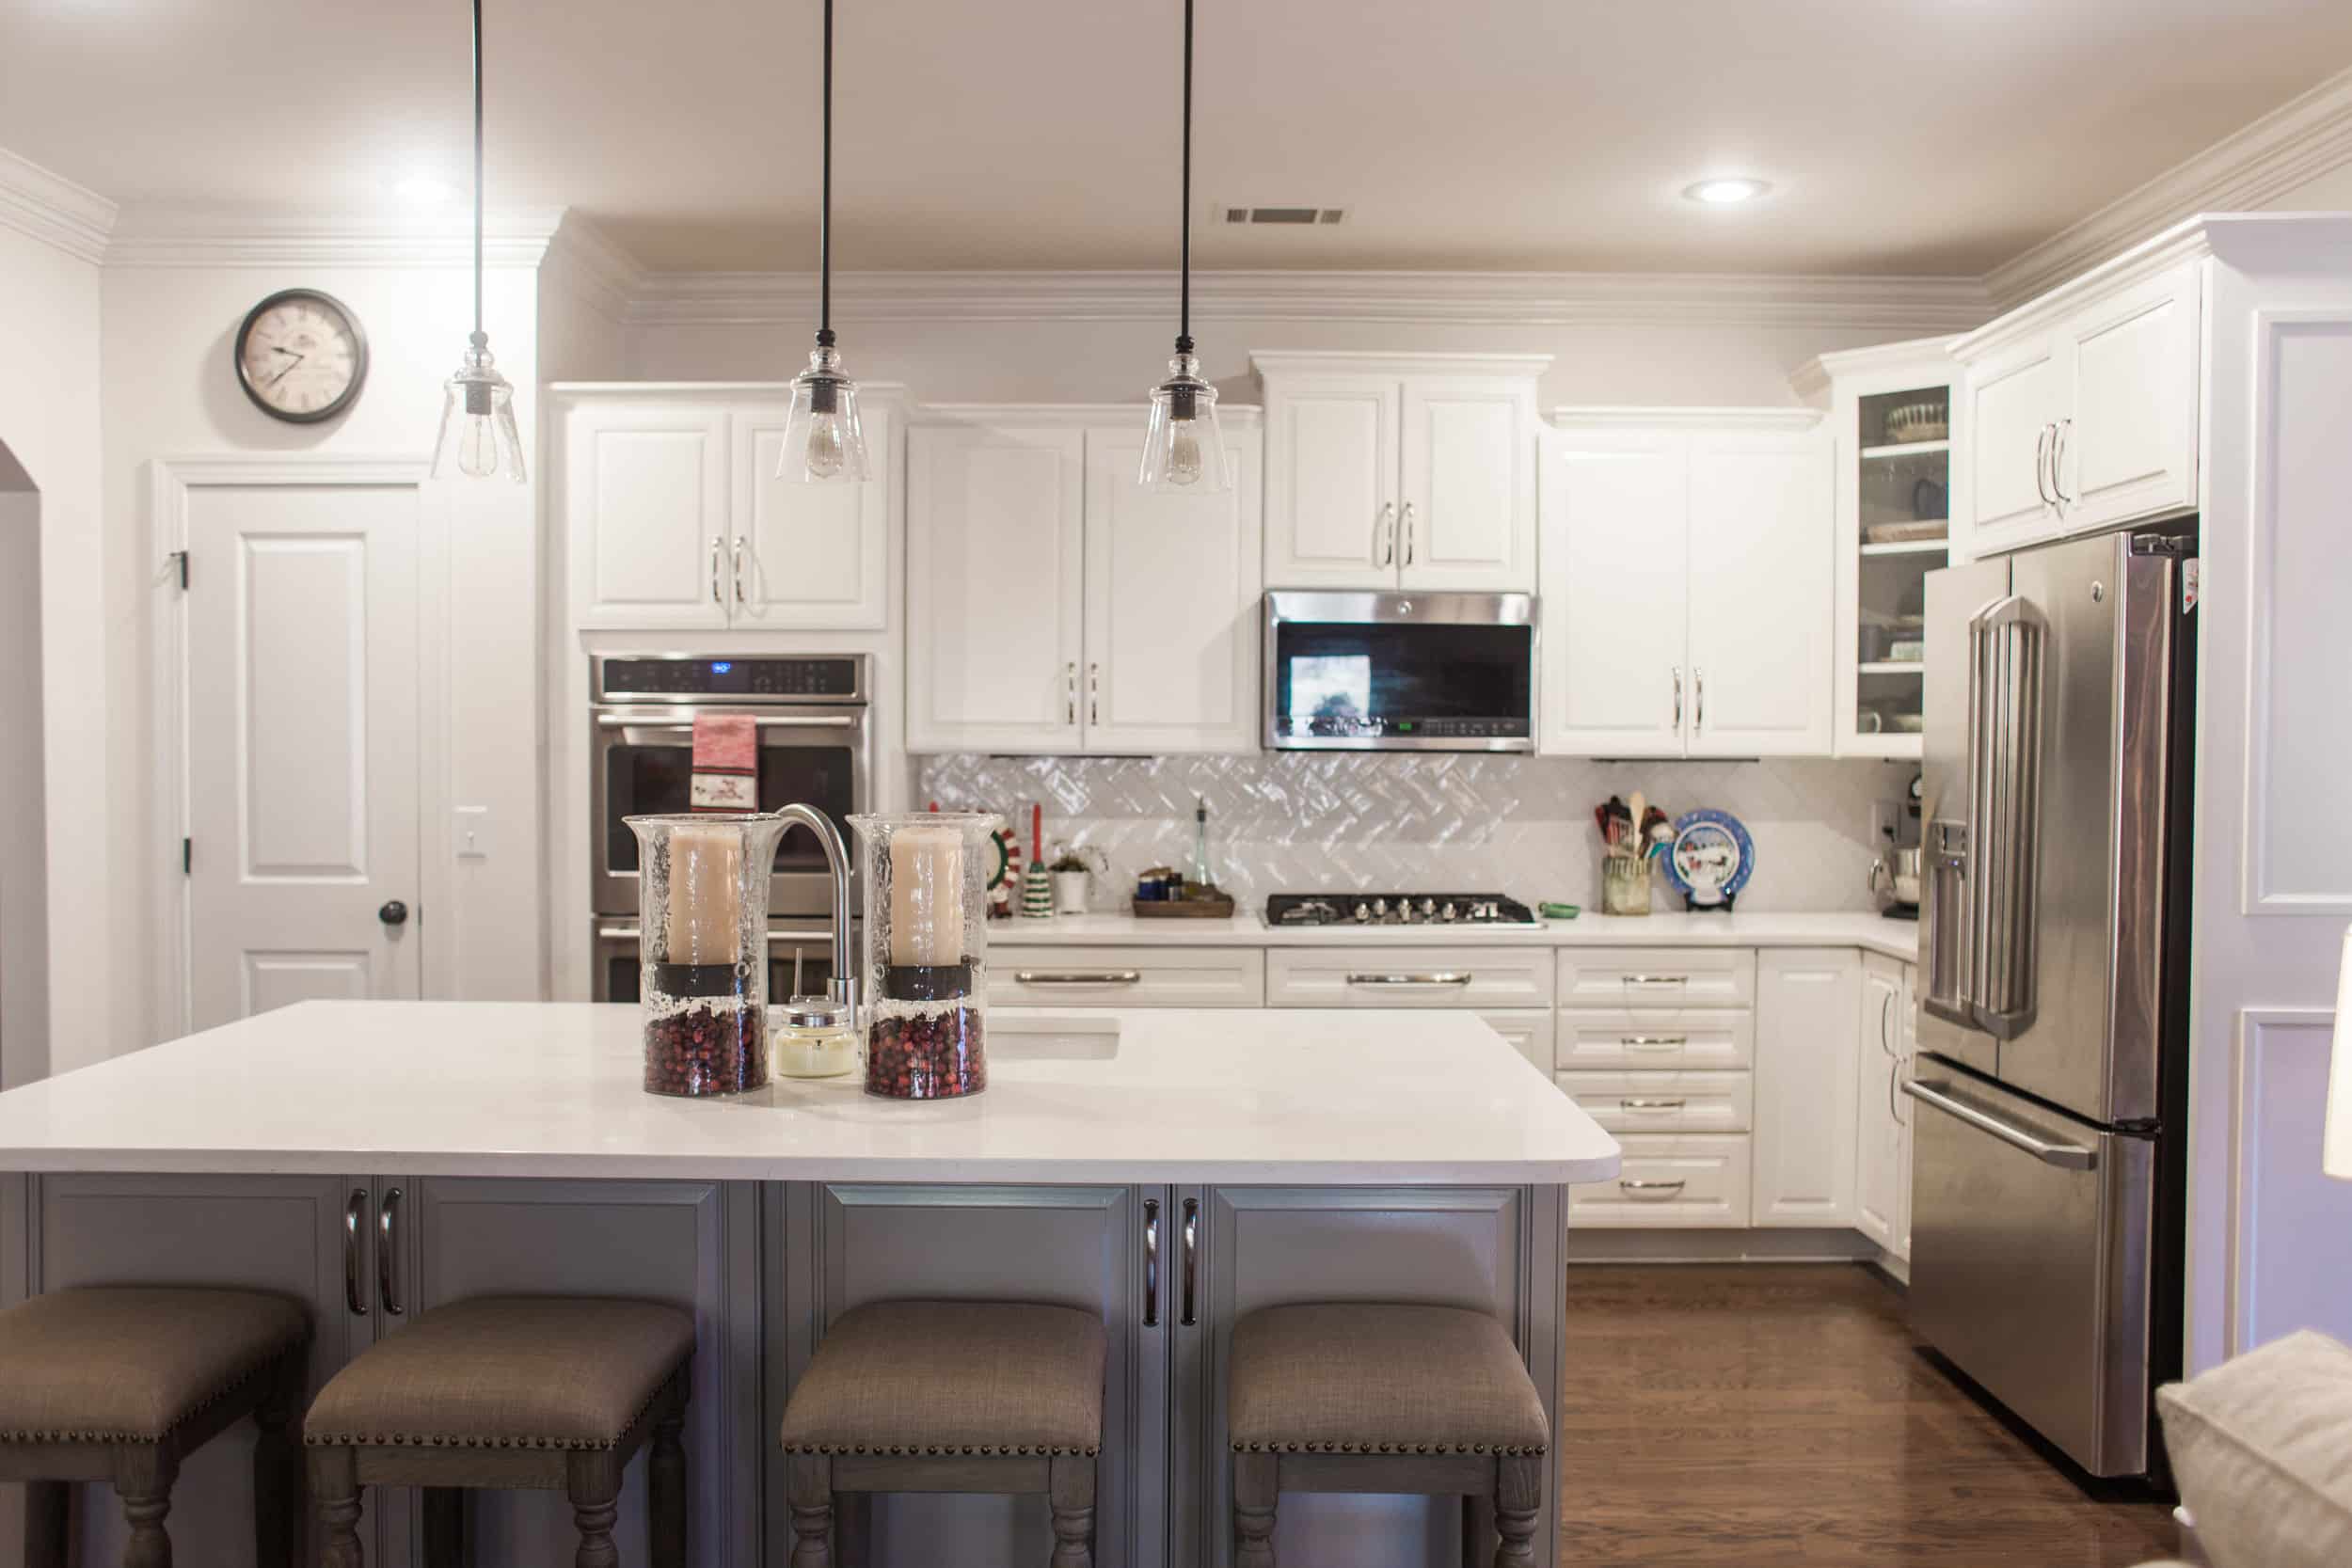 neutral paint colors featured in large kitchen including BM Sea Pearl 